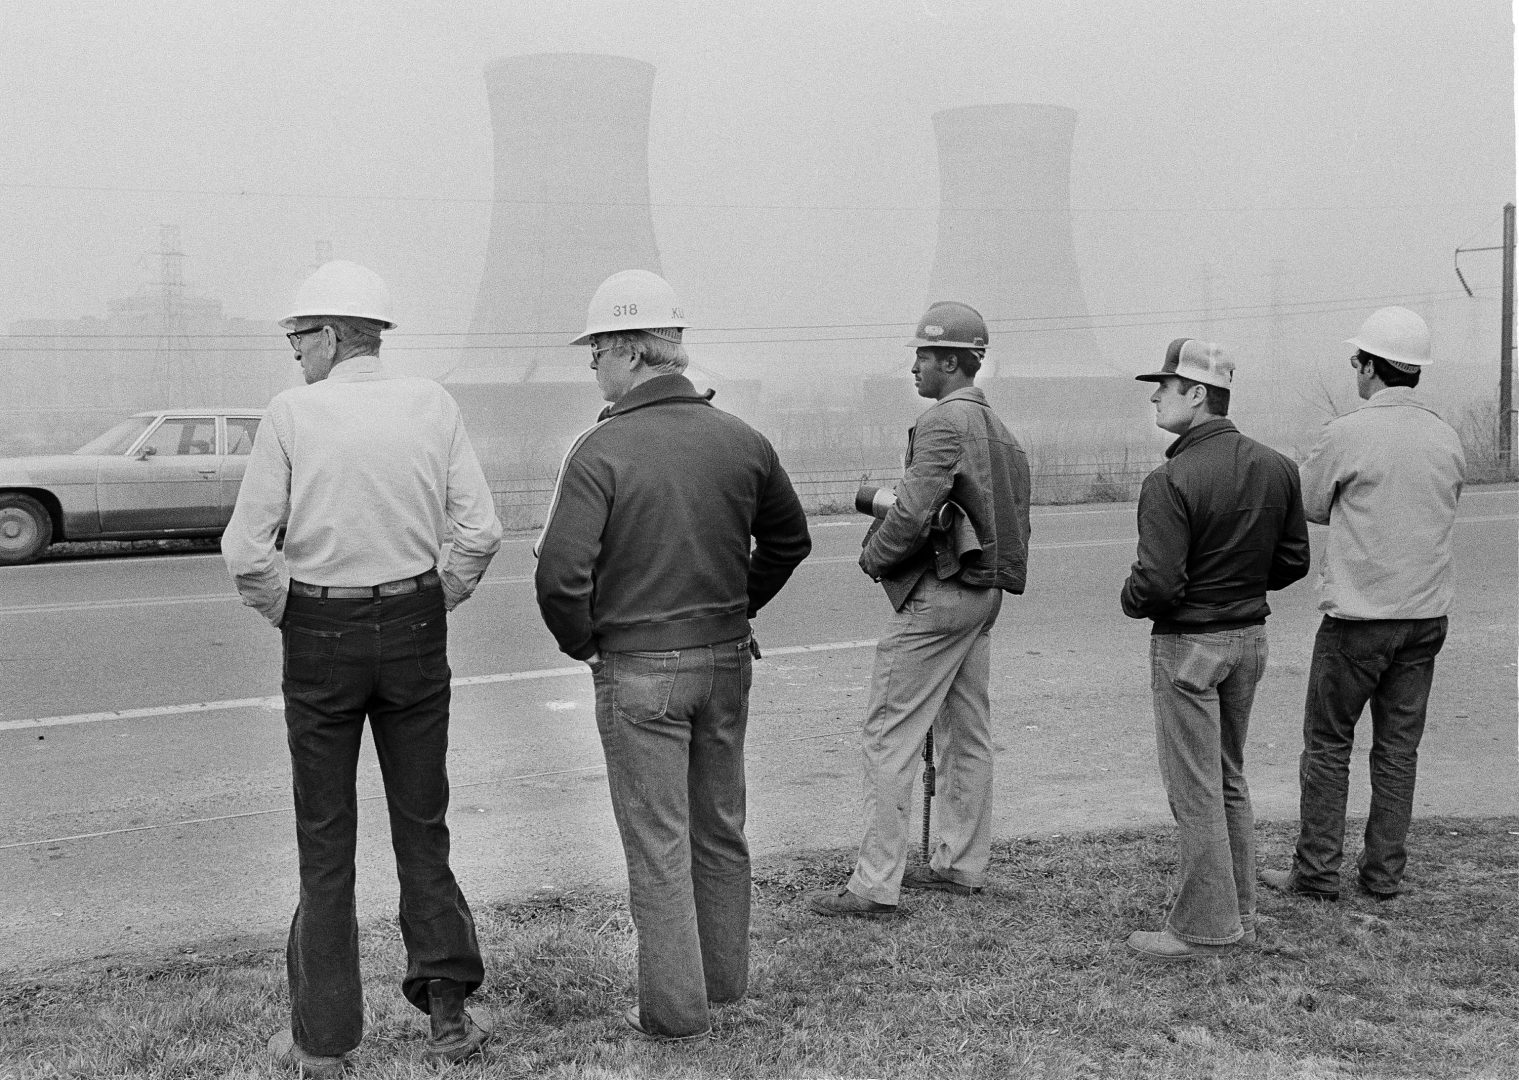 Workers from Metropolitan Edison's Three Mile Island nuclear plant stand outside visitors center early on March 30, 1979, as two cooling towers from the nuclear plant are visible in the background. Officials at the site declared an 